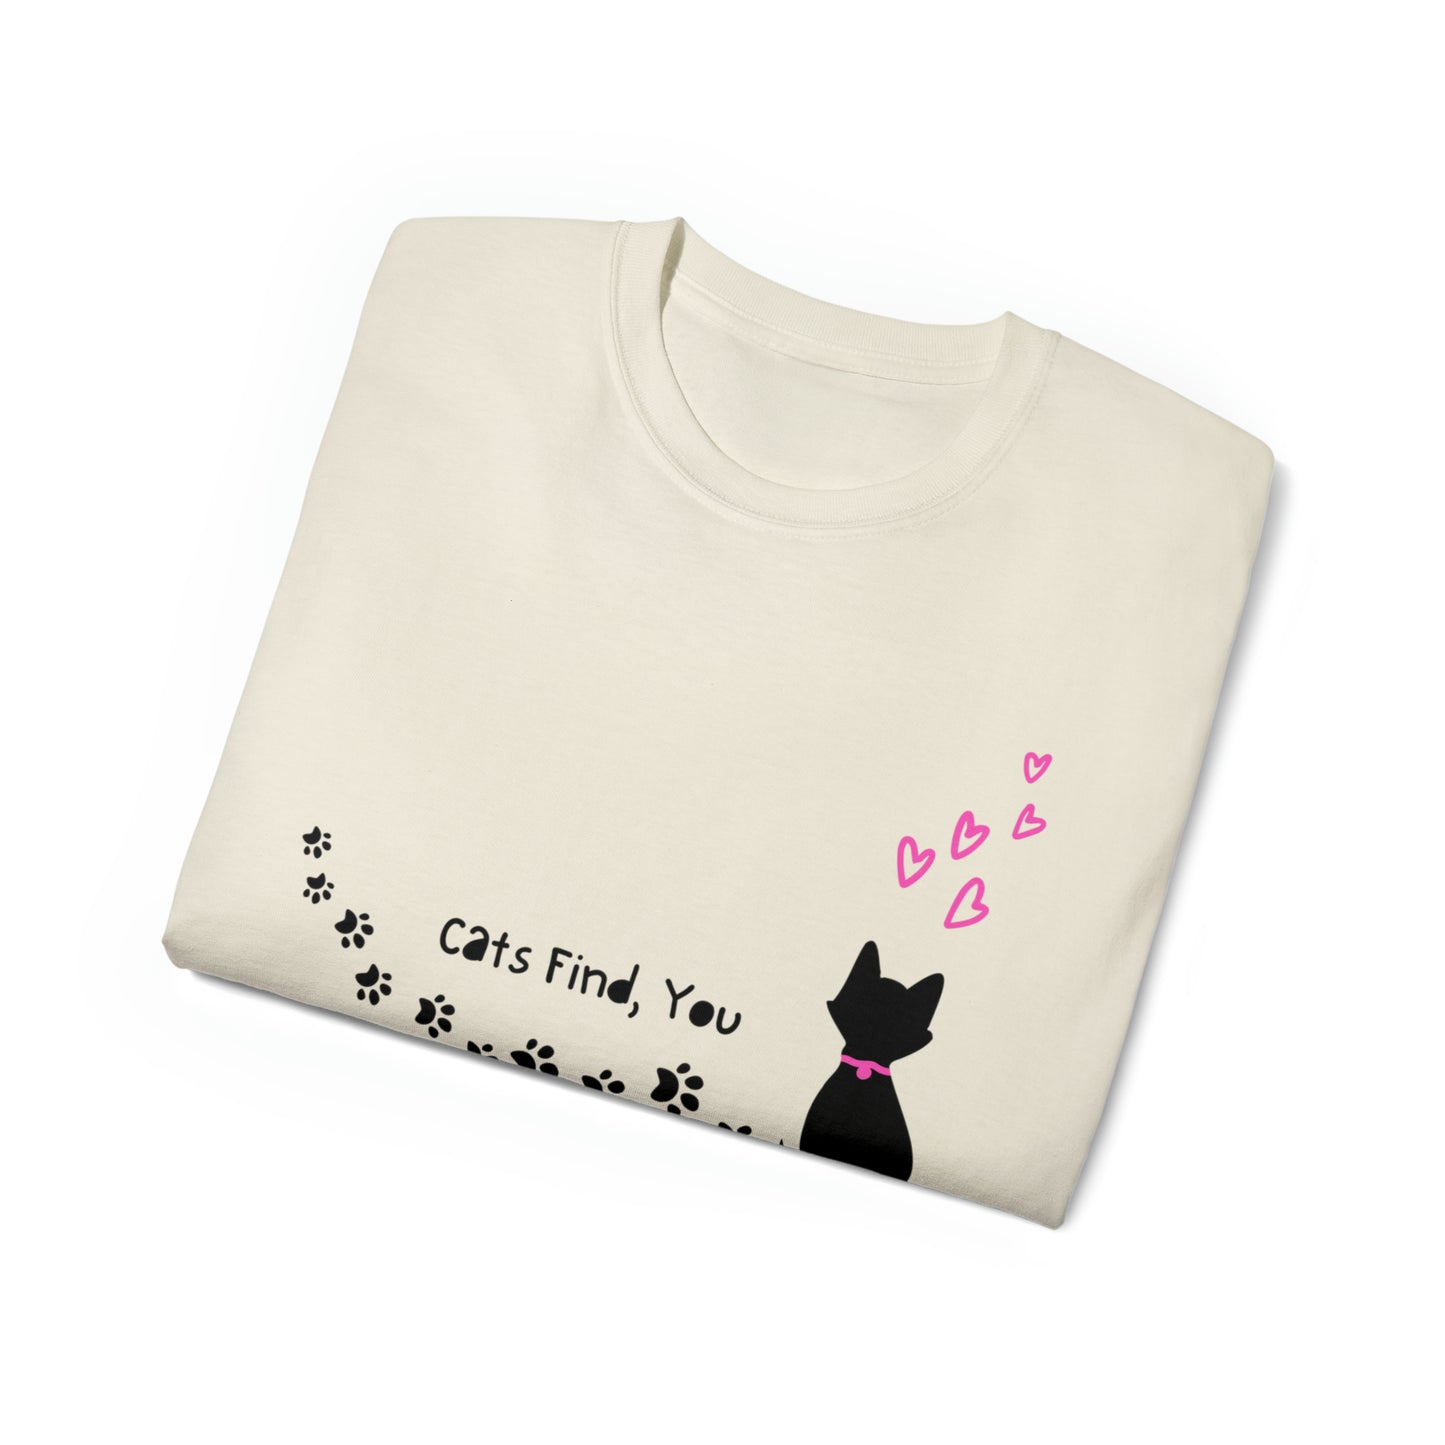 Cats Find You, Prints Across Your Heart, Unisex Ultra Soft Cotton Tee!